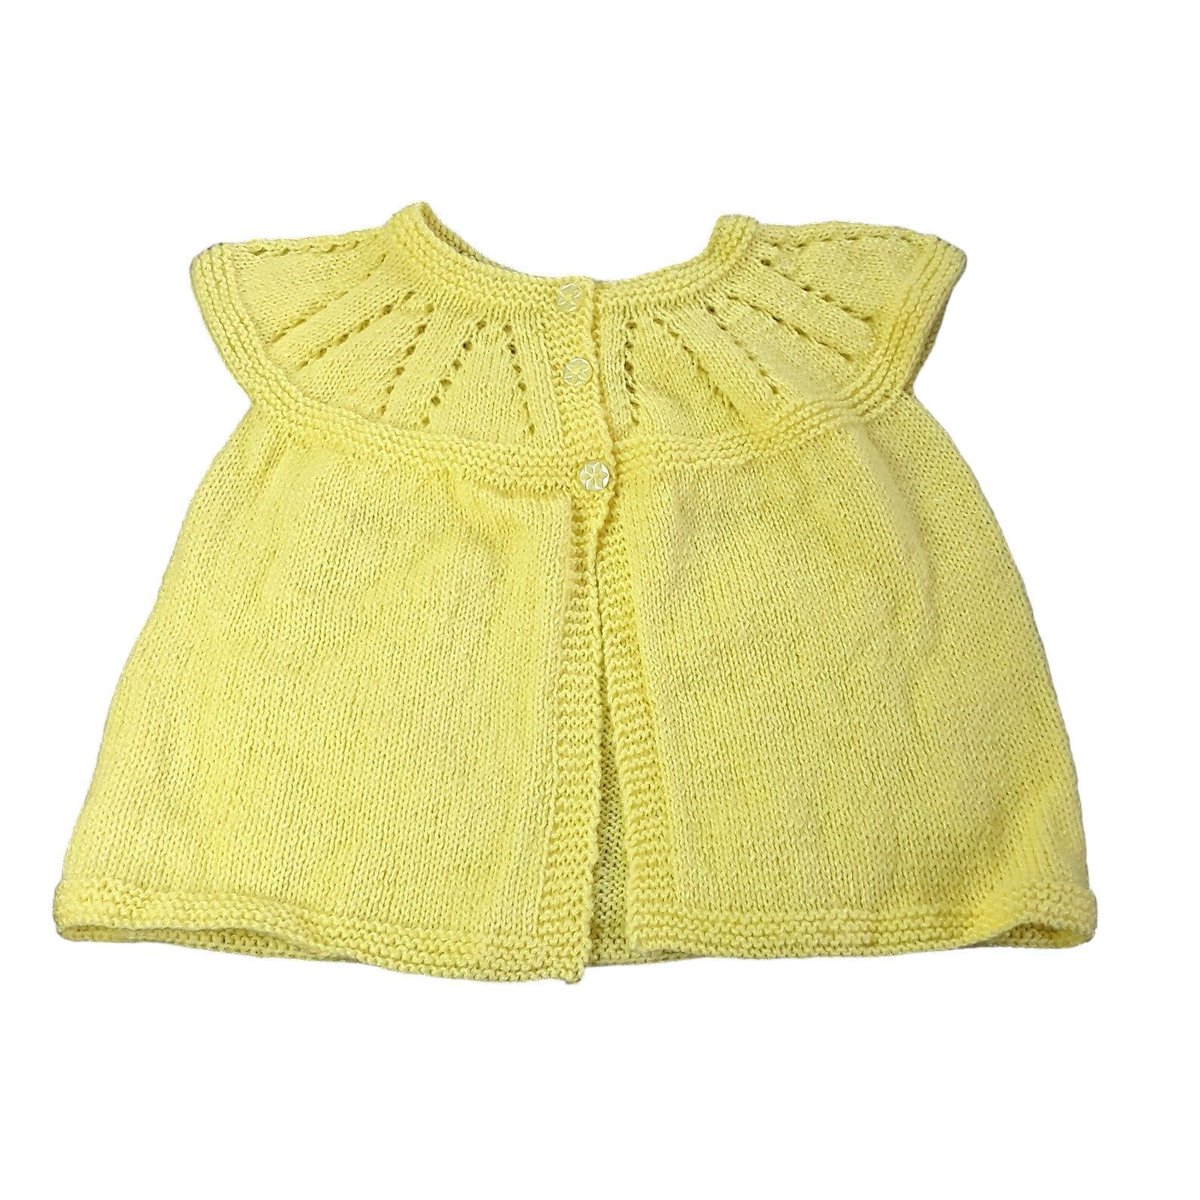 Add a pop of colour to your little girl's outfit with this hand-knitted yellow cardigan - perfect for 4-5 year olds. Shop this unique piece from #Knittingtopia on #Etsy today! #handmade knittingtopia.etsy.com/listing/170060… #craftbizparty #MHHSBD #uksmallbiz